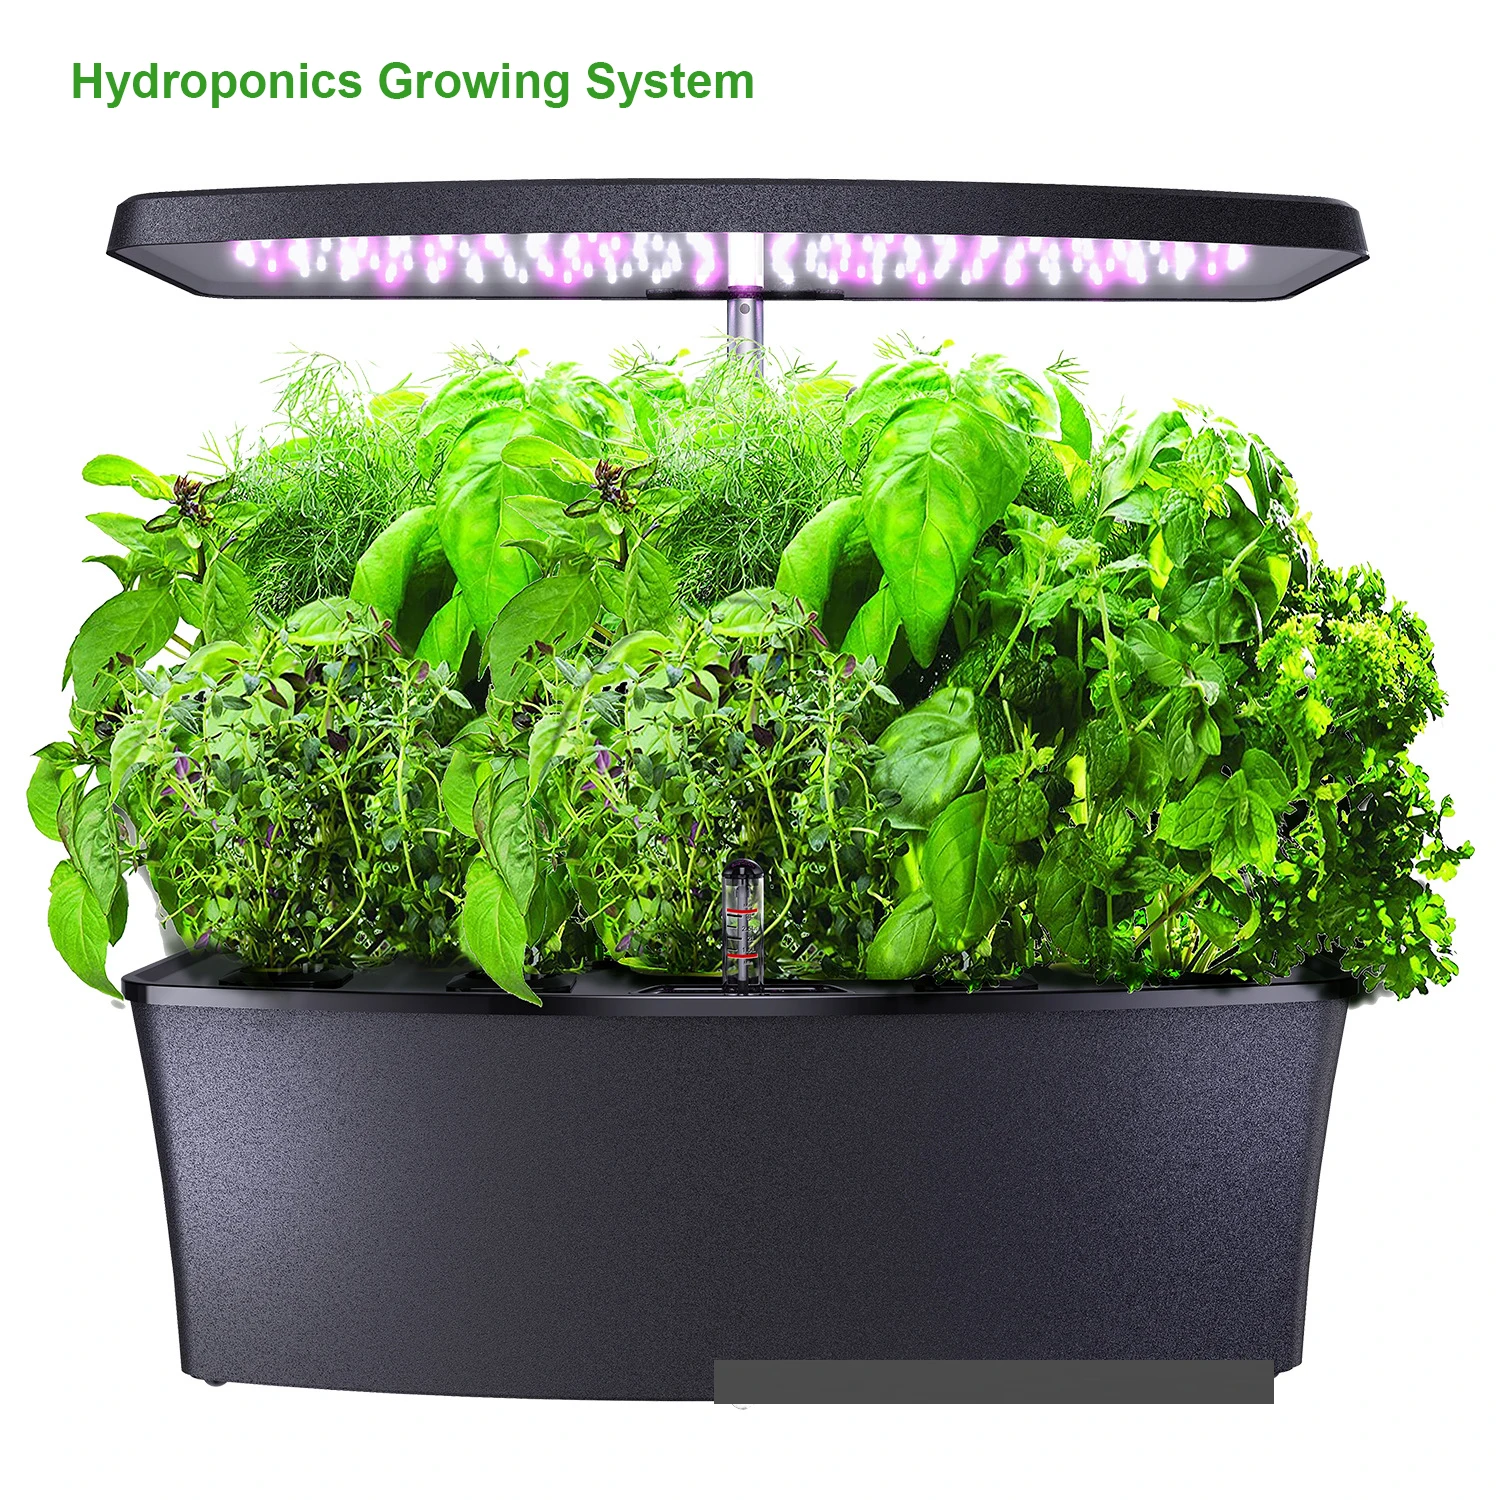 Intelligent Hydroponic Machine 12 Pods Hydroponics Growing System Garden Plant Kit Automatic Timing LED Grow Lights For Greenhou